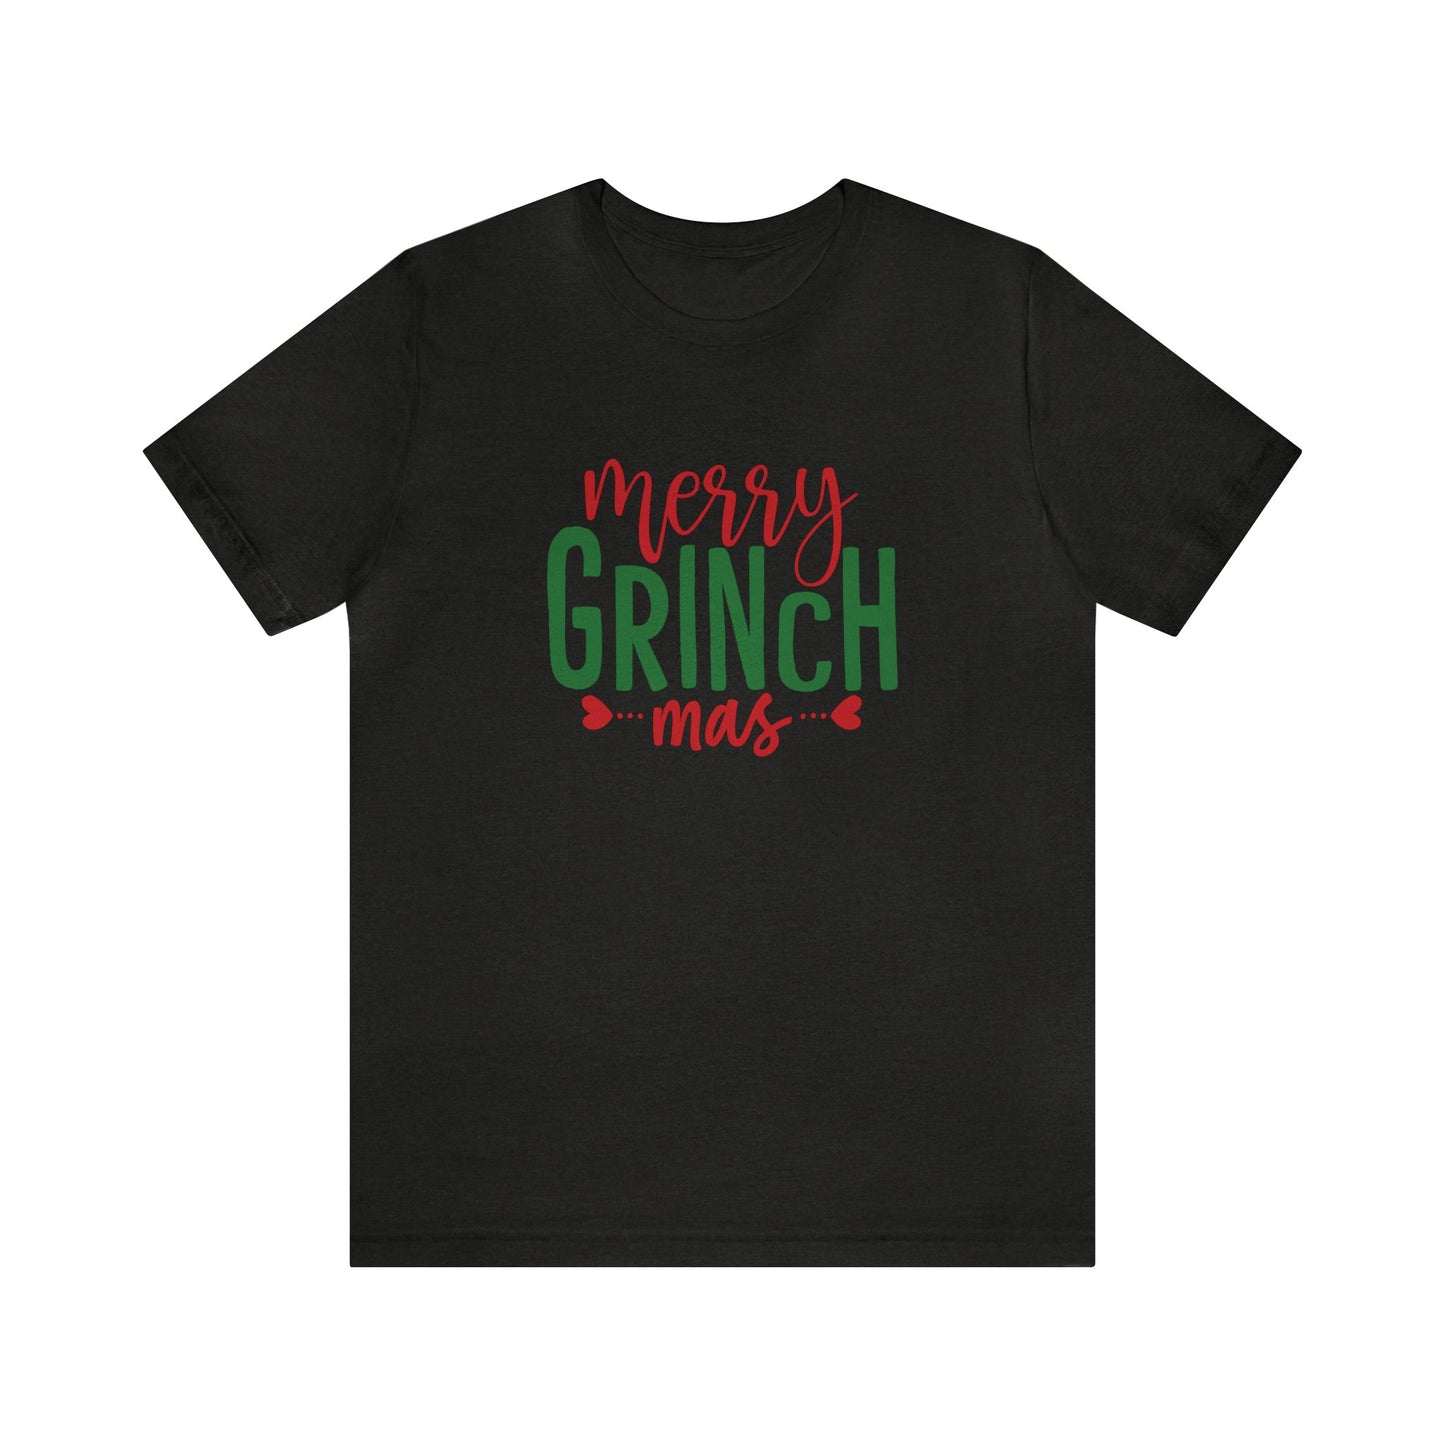 Grinch T-Shirt For Merry Christmas T Shirt For Funny Holiday TShirt For Xmas Gift Idea